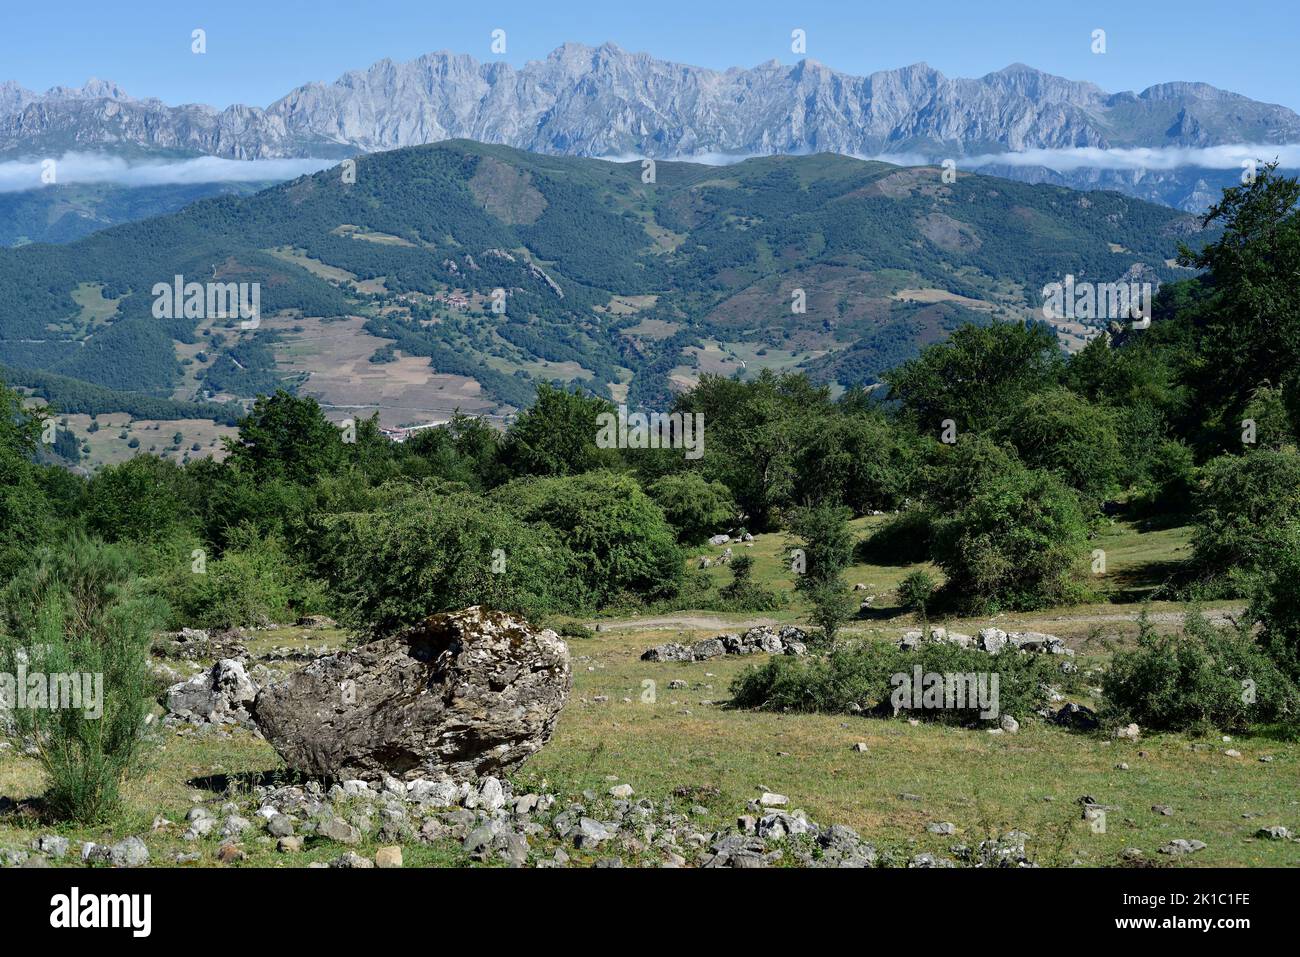 Picos de Europa, Macizo Oriental (Eastern Massif) seen from the footpath above Cucayo, Parque Natural de Fuentes Carrionas, Cantabria, northern Spain. Stock Photo